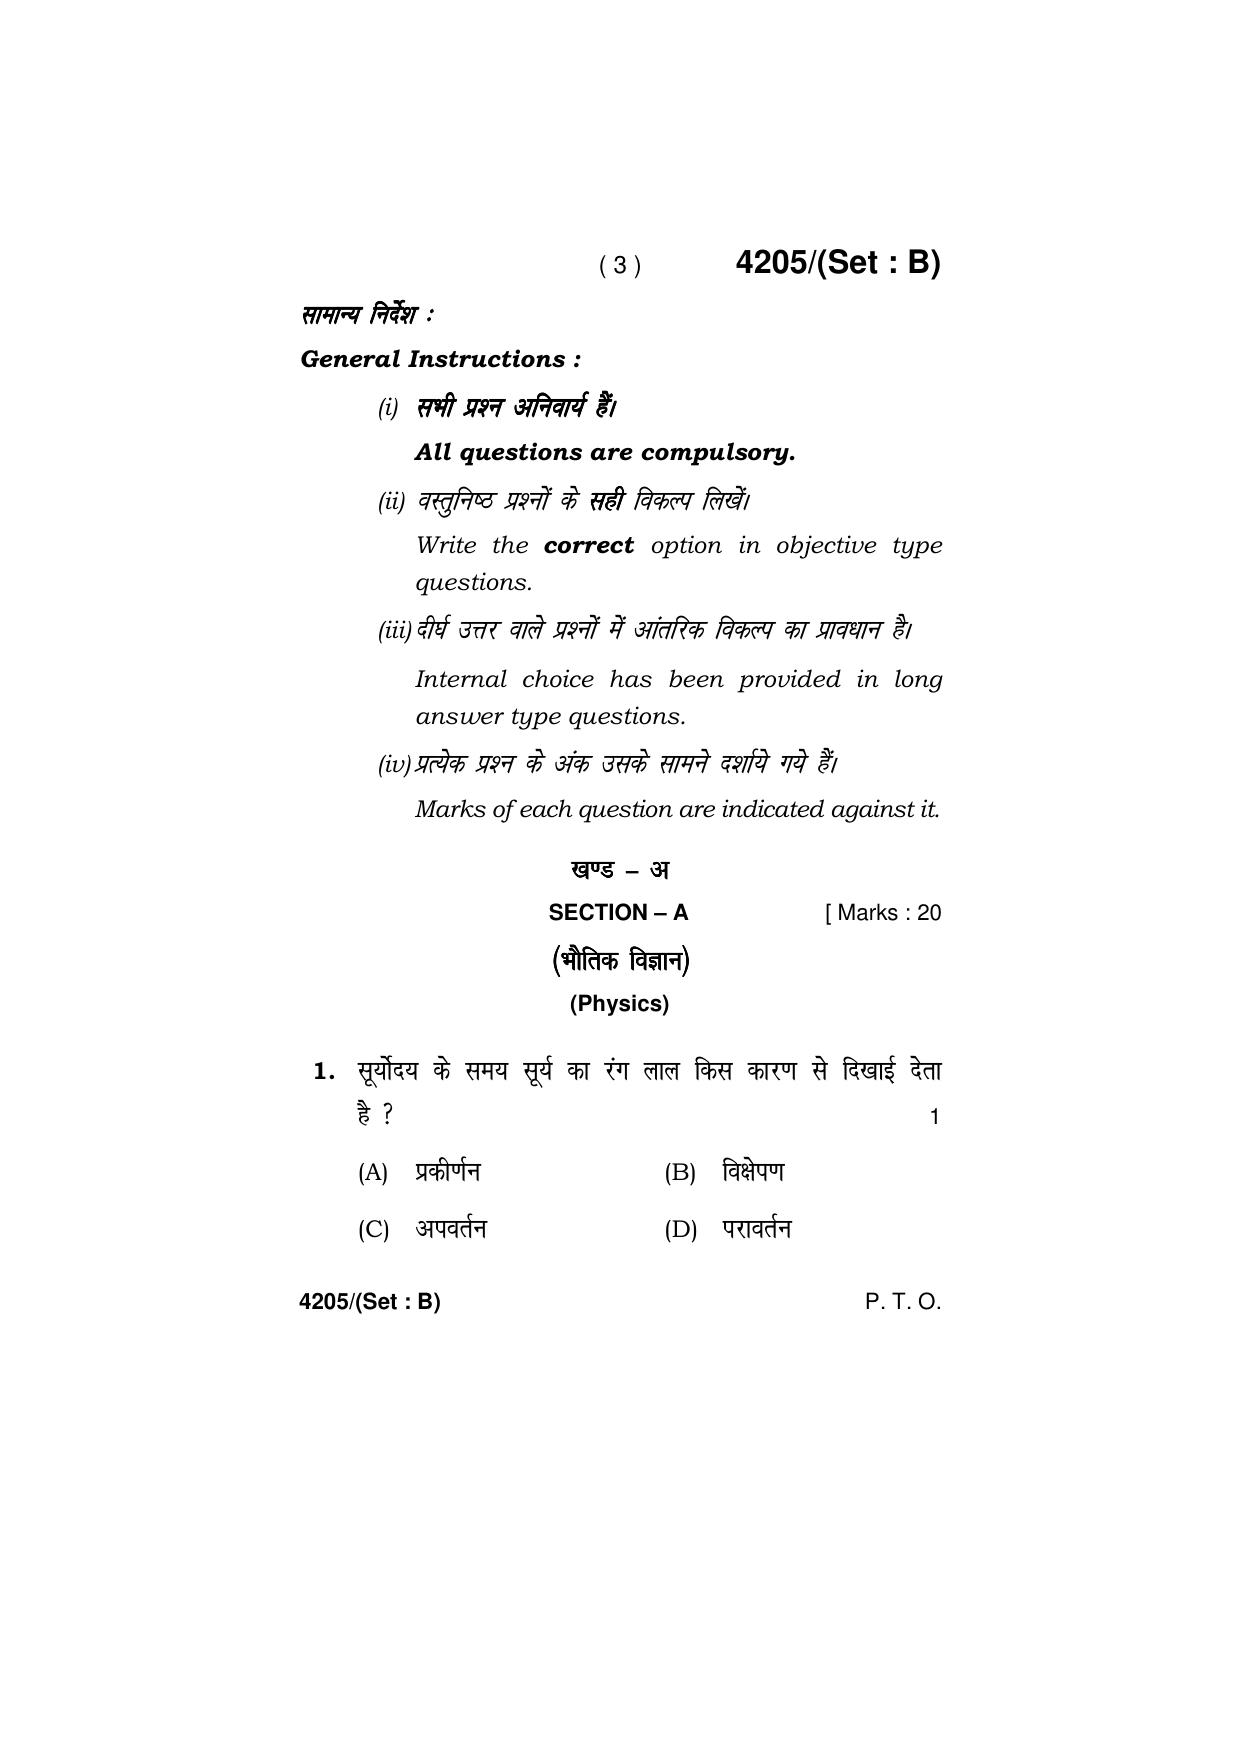 Haryana Board HBSE Class 10 Science (All Set) 2019 Question Paper - Page 19